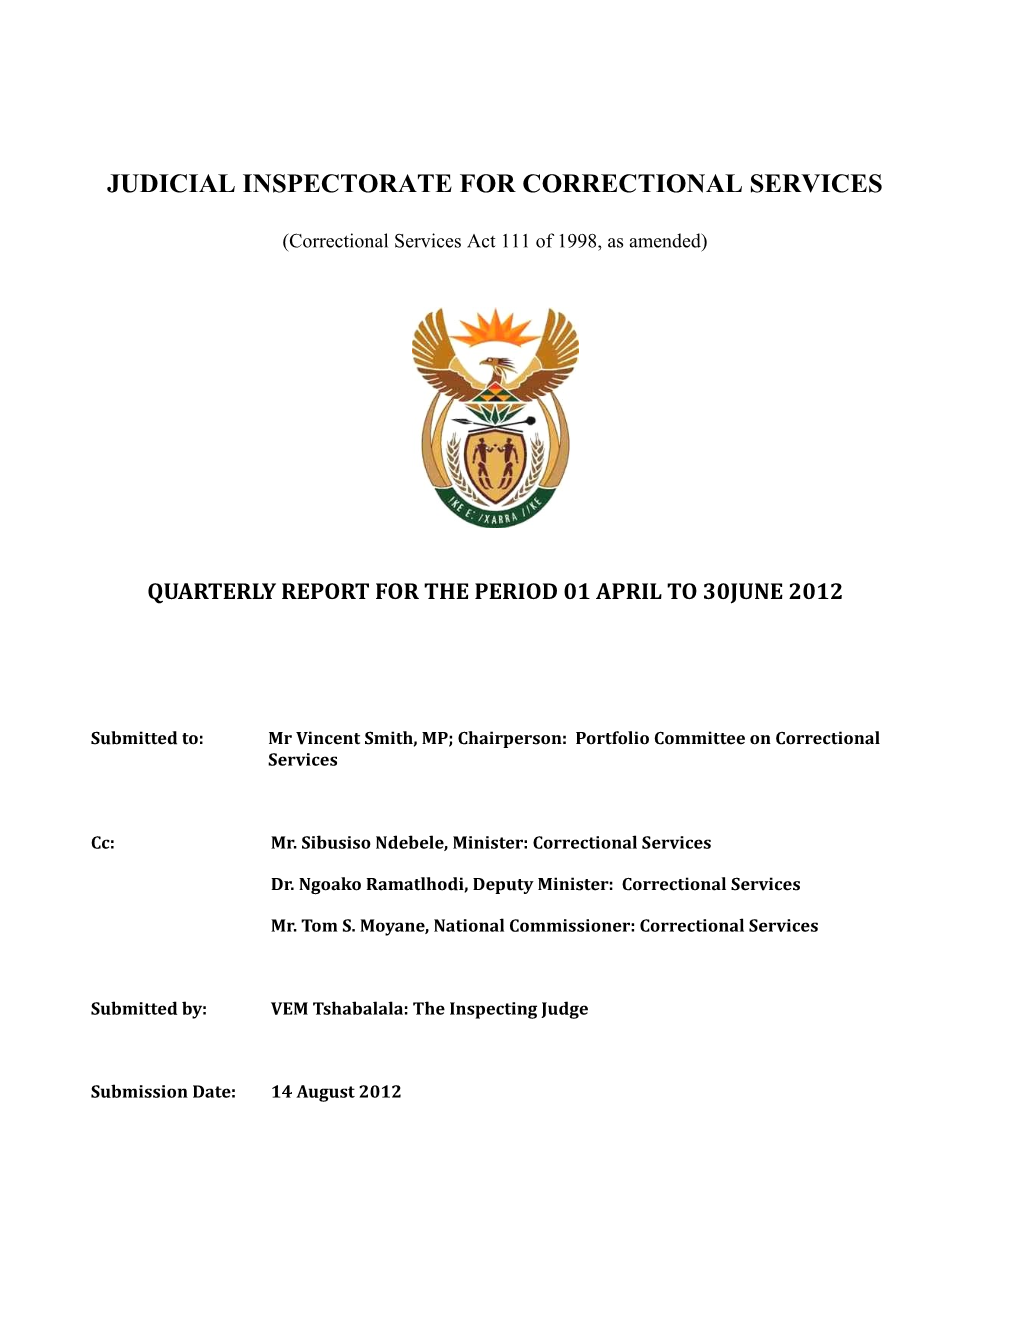 Judicial Inspectorate for Correctional Services